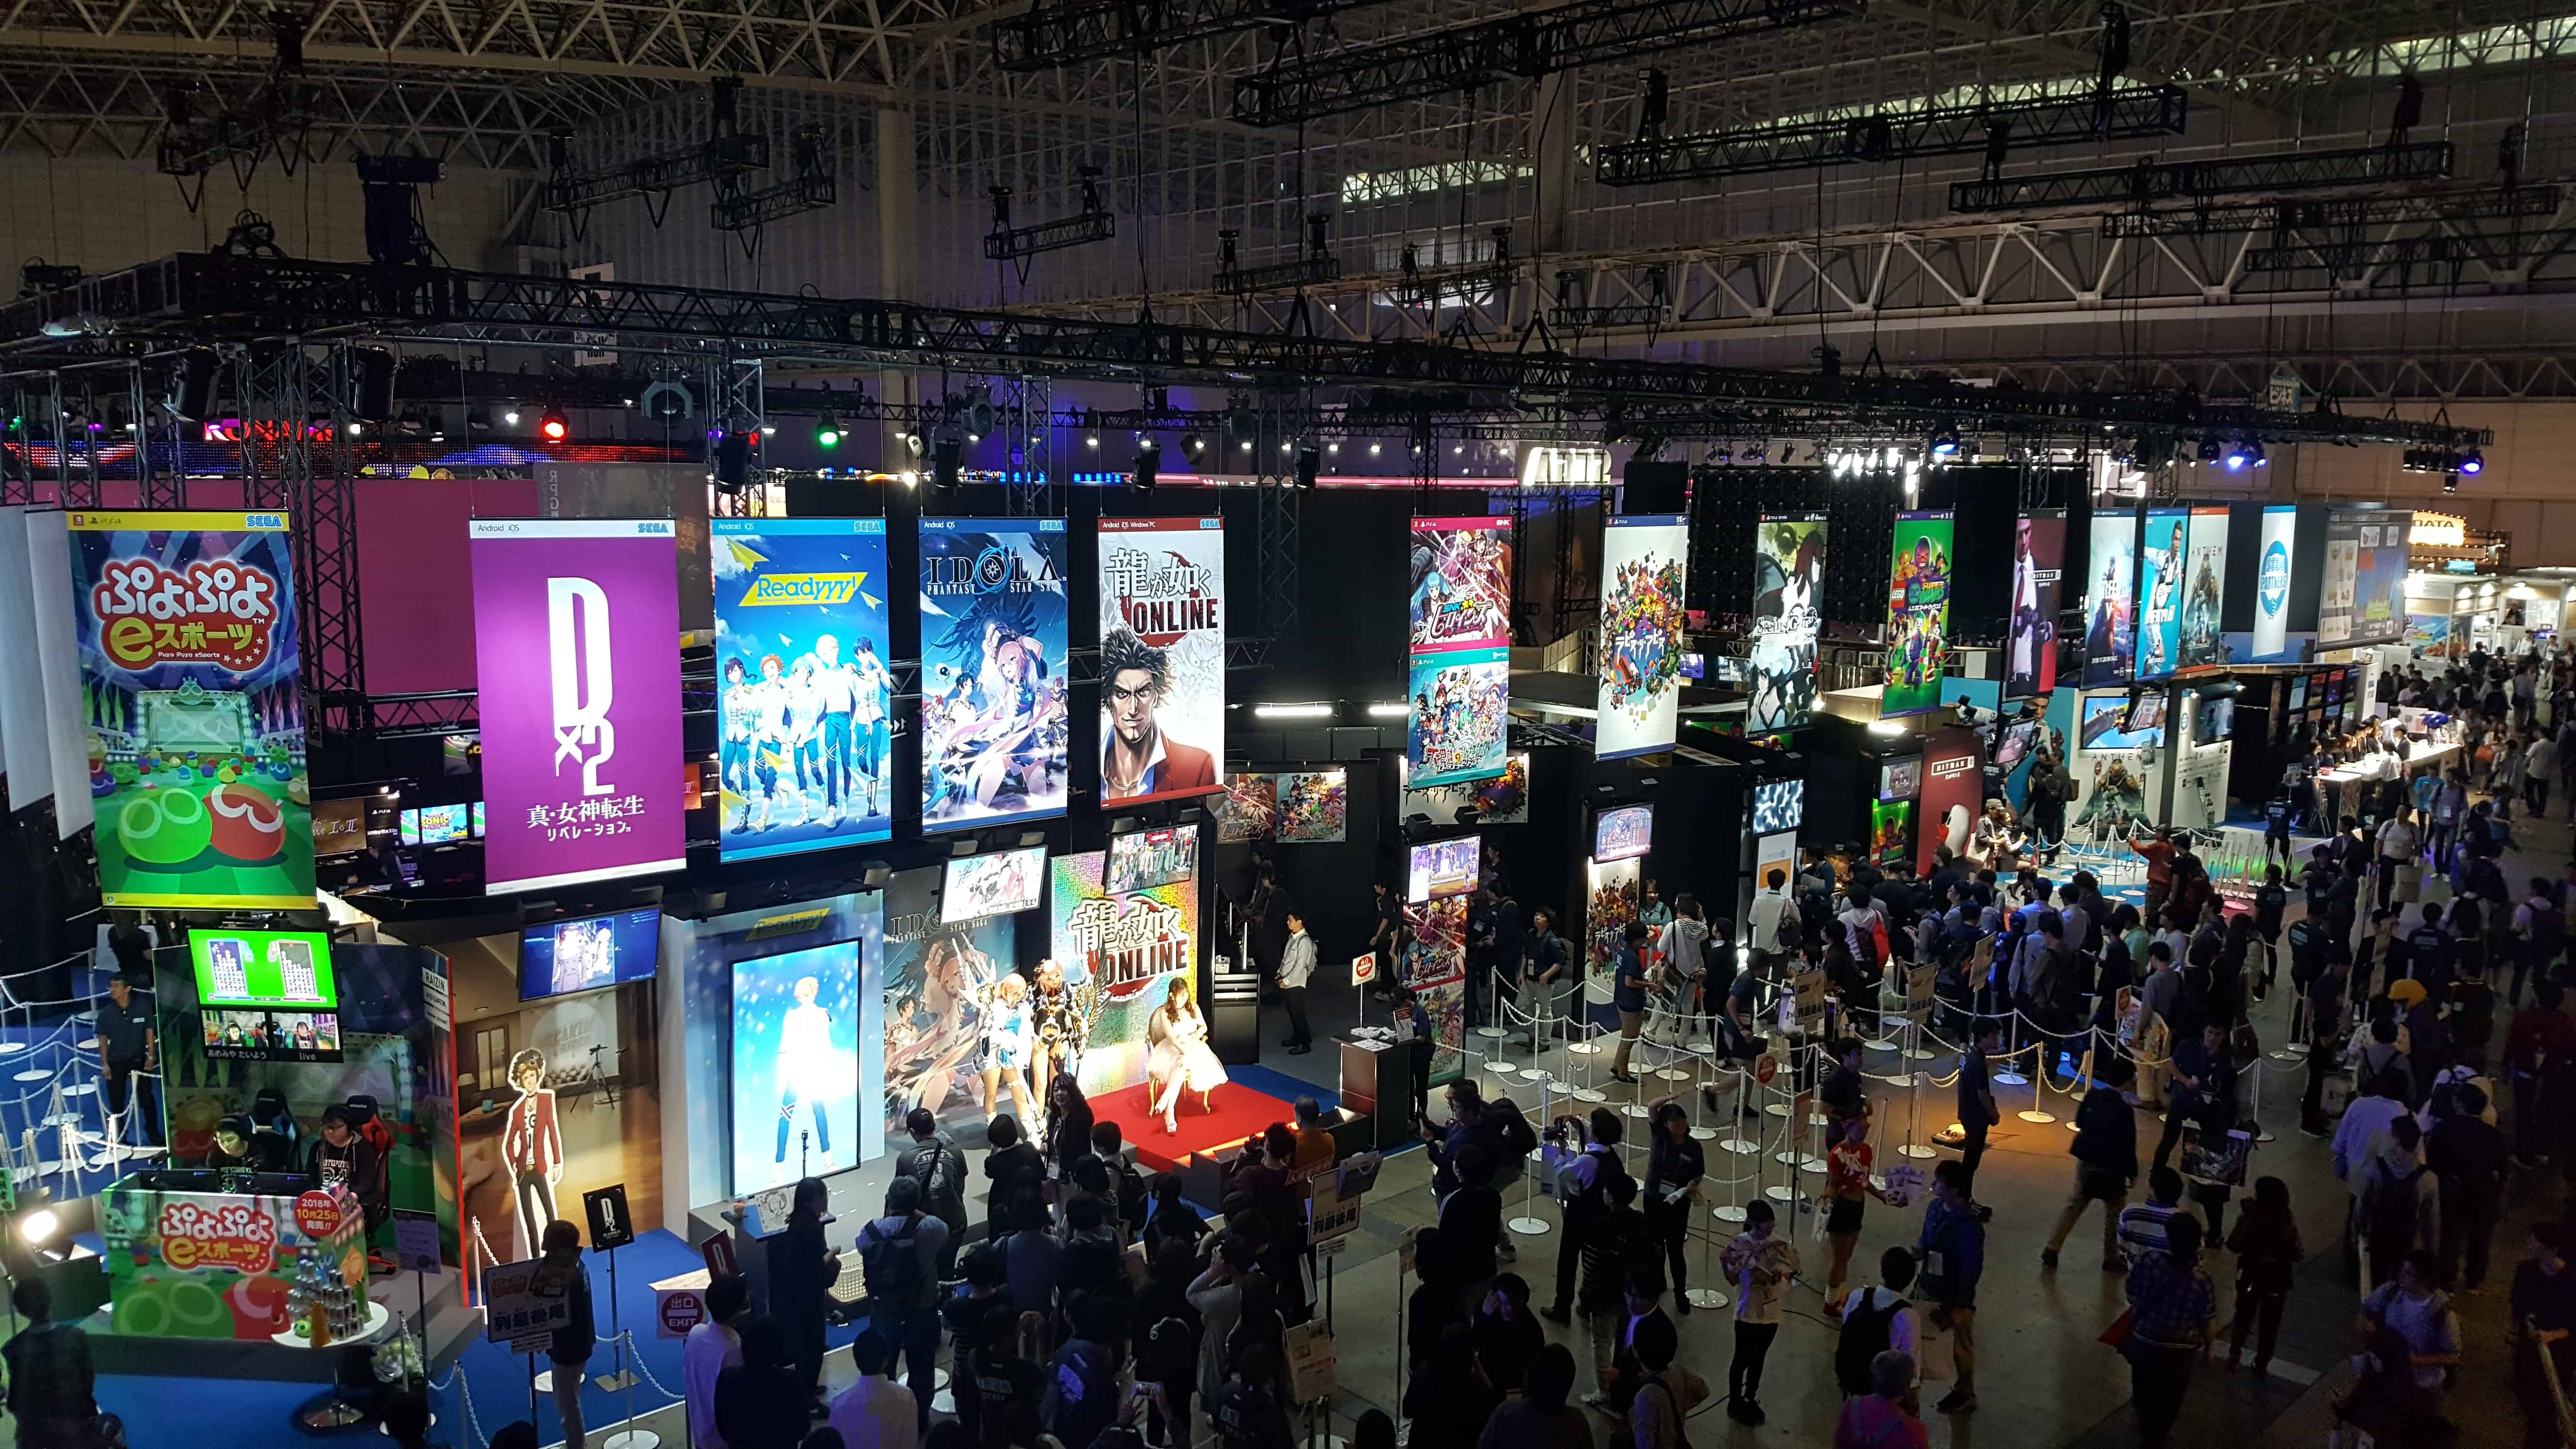 Heading Into The Show Hall, The First Booth You'Ll Be Greeted By Is Sega'S.